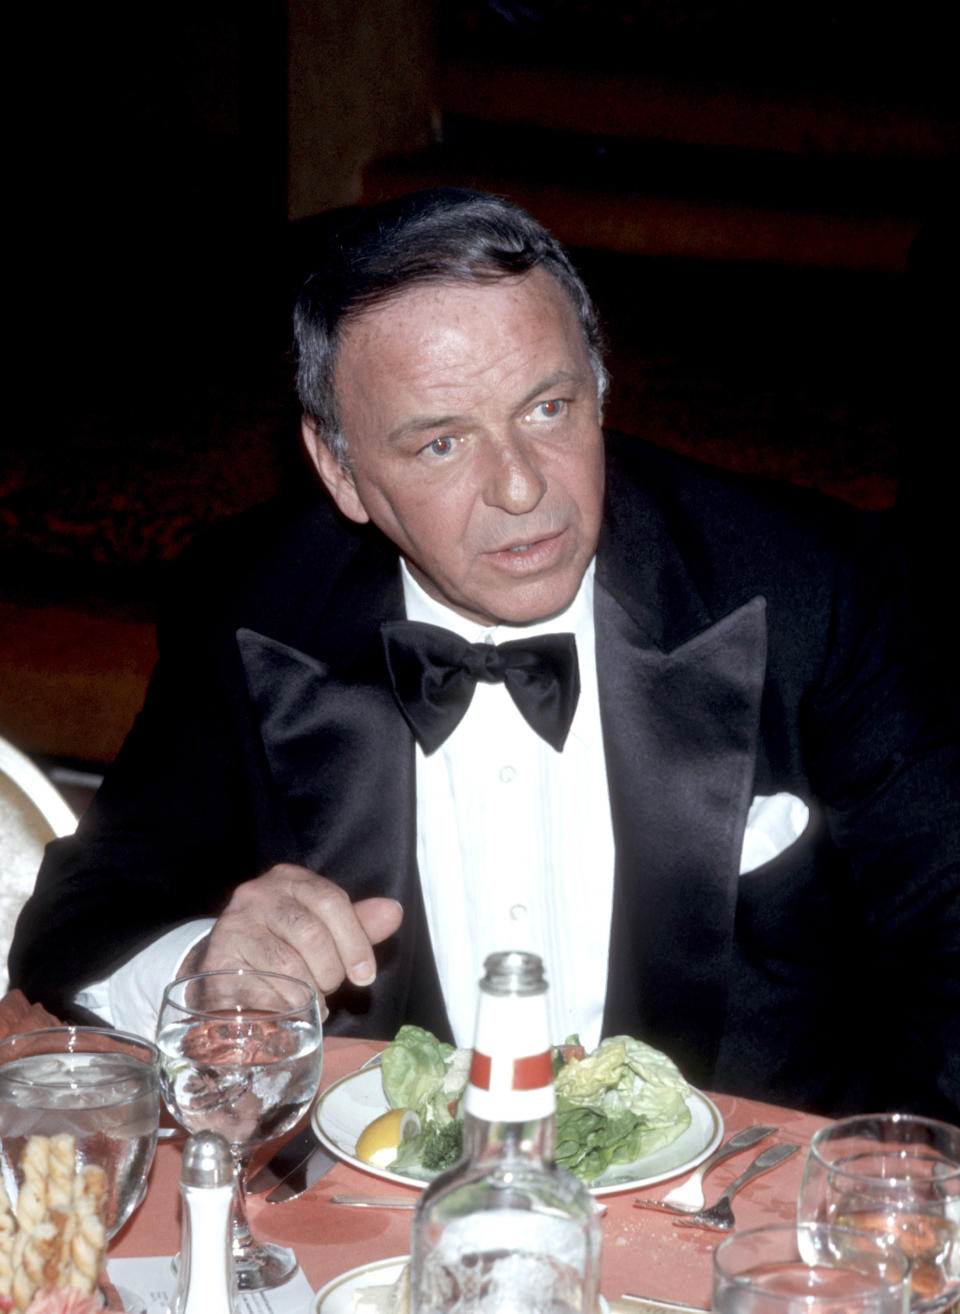 Close-up of Frank sitting at a table with a plate of food in front of him and wearing a bow tie